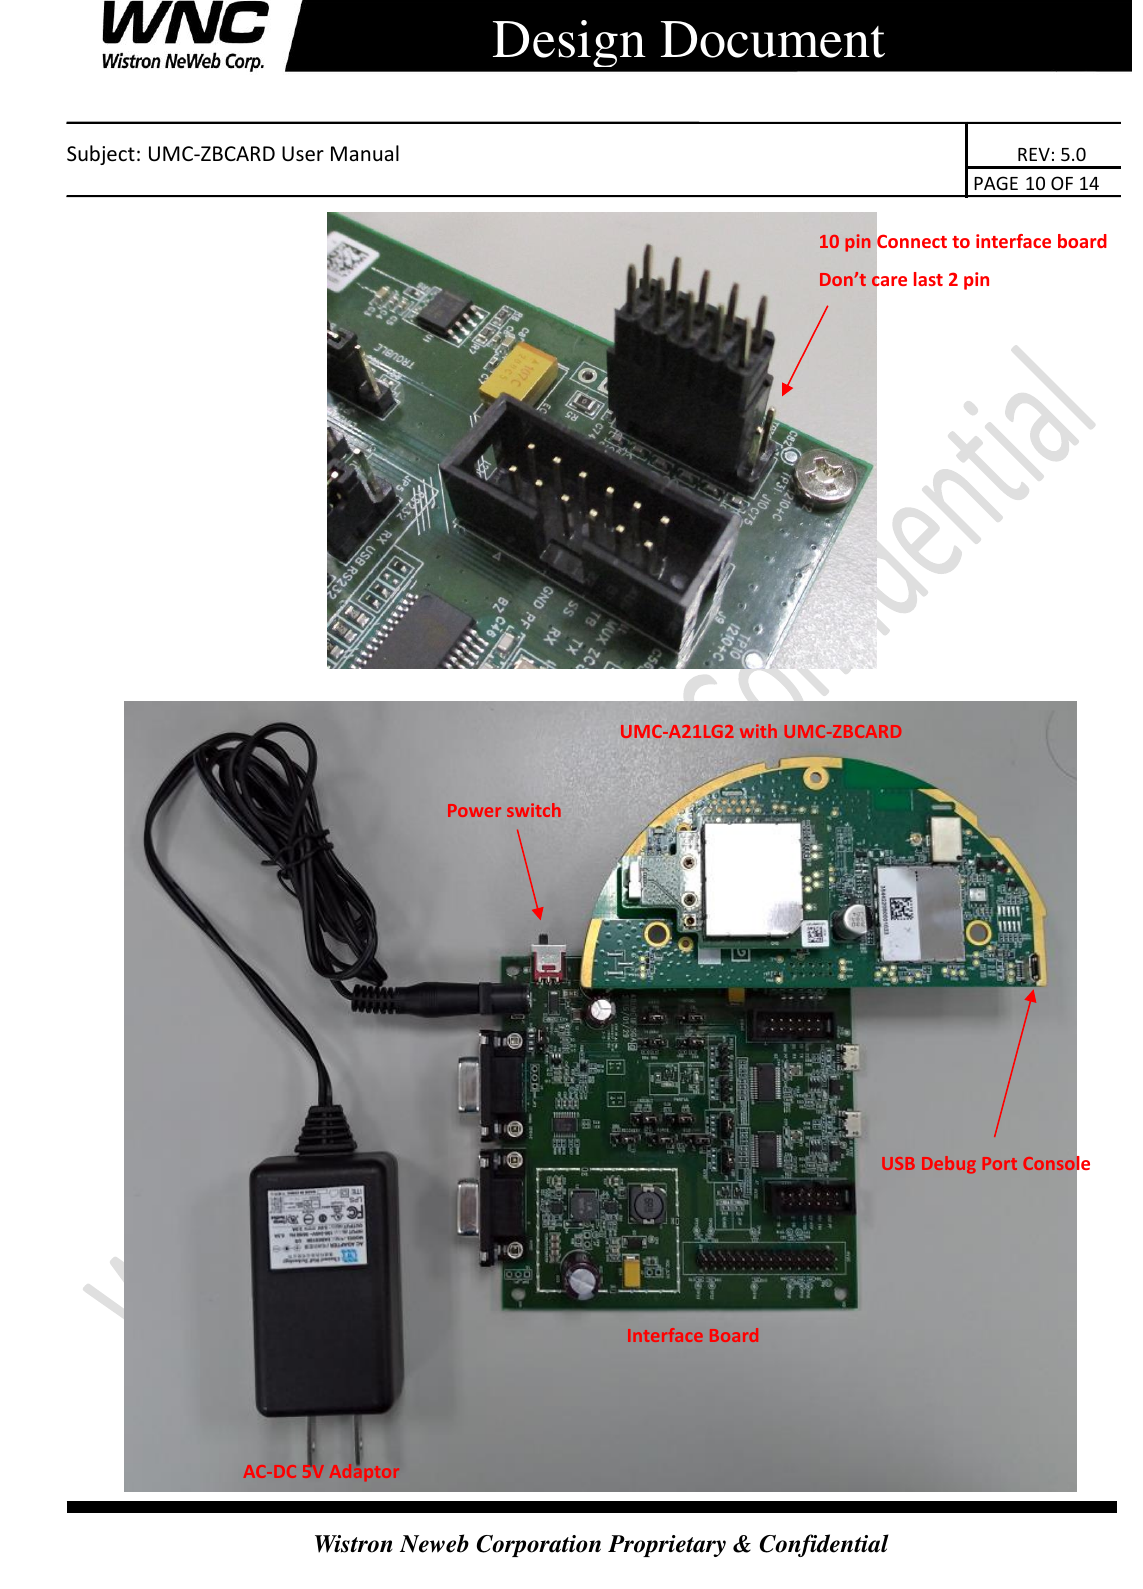    Subject: UMC-ZBCARD User Manual                                                                      REV: 5.0                                                                                        PAGE 10 OF 14  Wistron Neweb Corporation Proprietary &amp; Confidential      Design Document   AC-DC 5V Adaptor Interface Board   UMC-A21LG2 with UMC-ZBCARD USB Debug Port Console Power switch 10 pin Connect to interface board Don’t care last 2 pin 